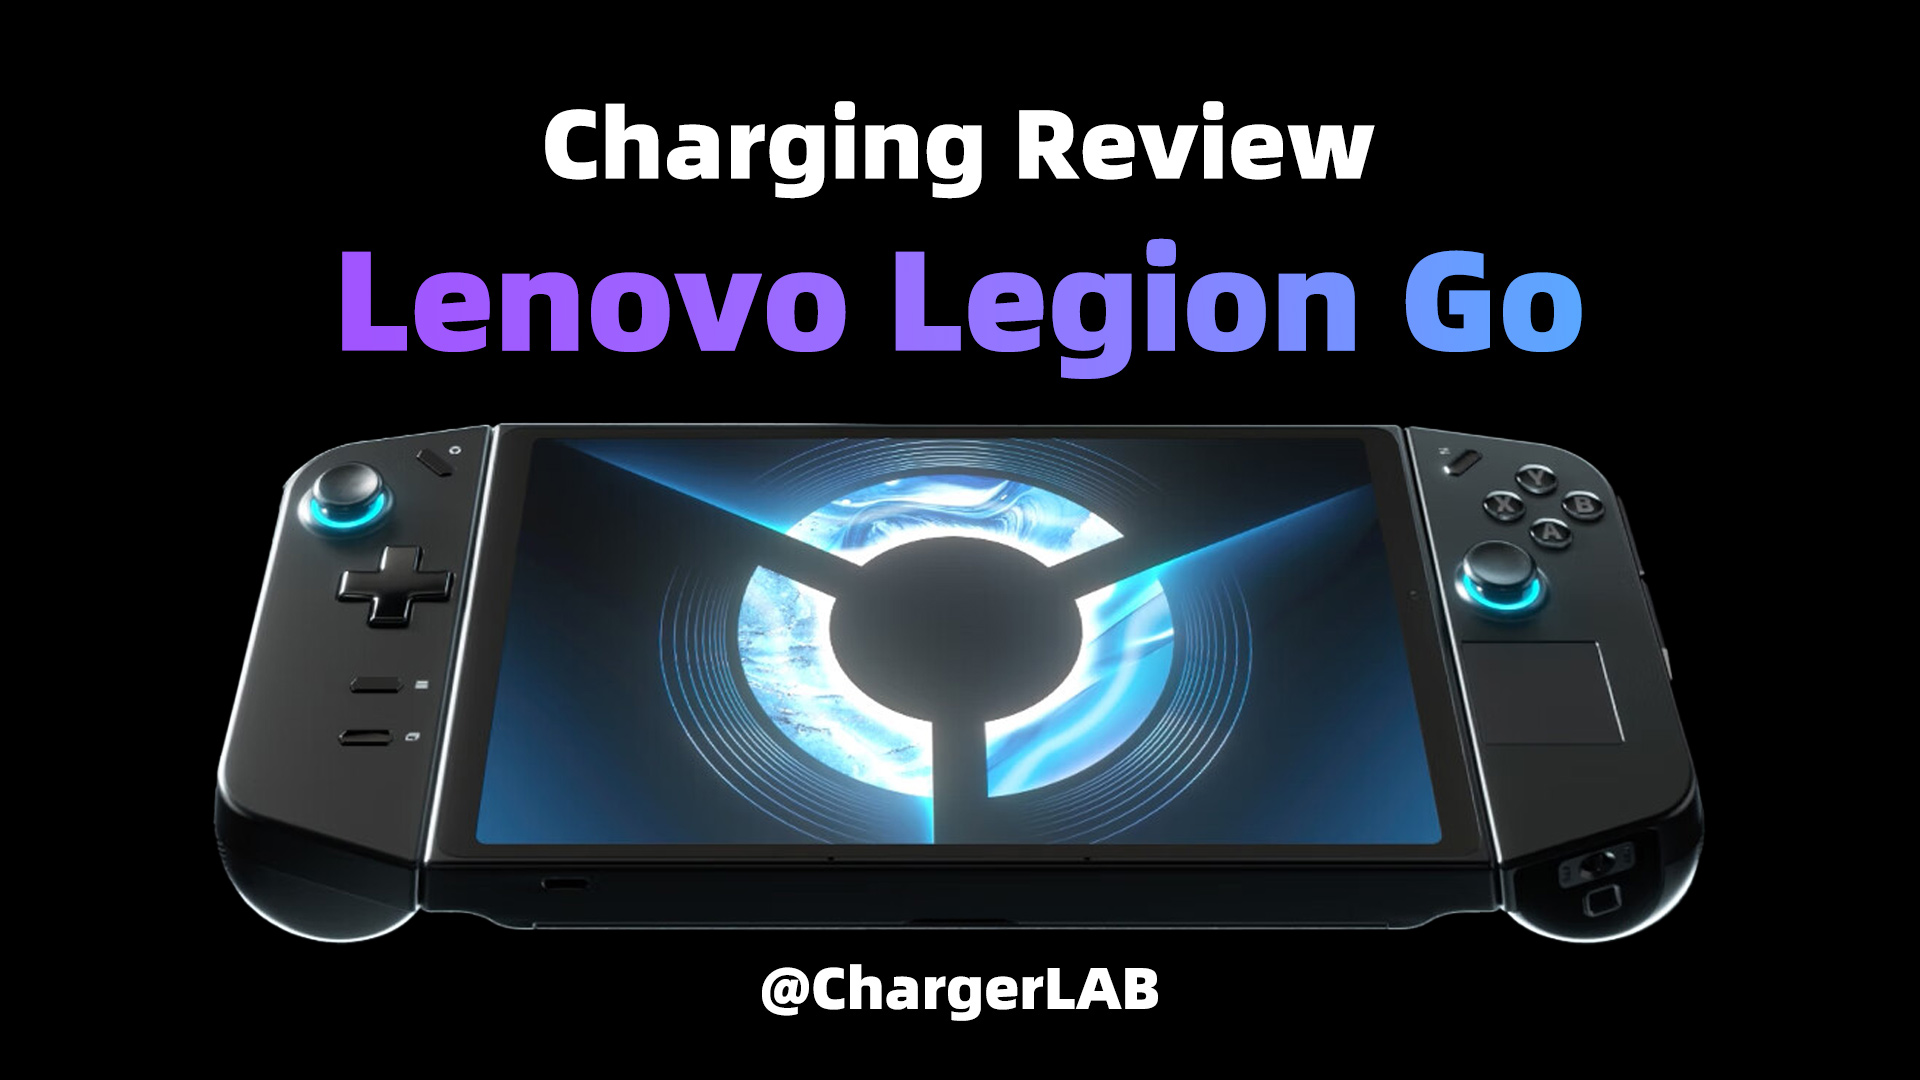 Charging Review of Lenovo Legion Go Handheld Game Console - Chargerlab